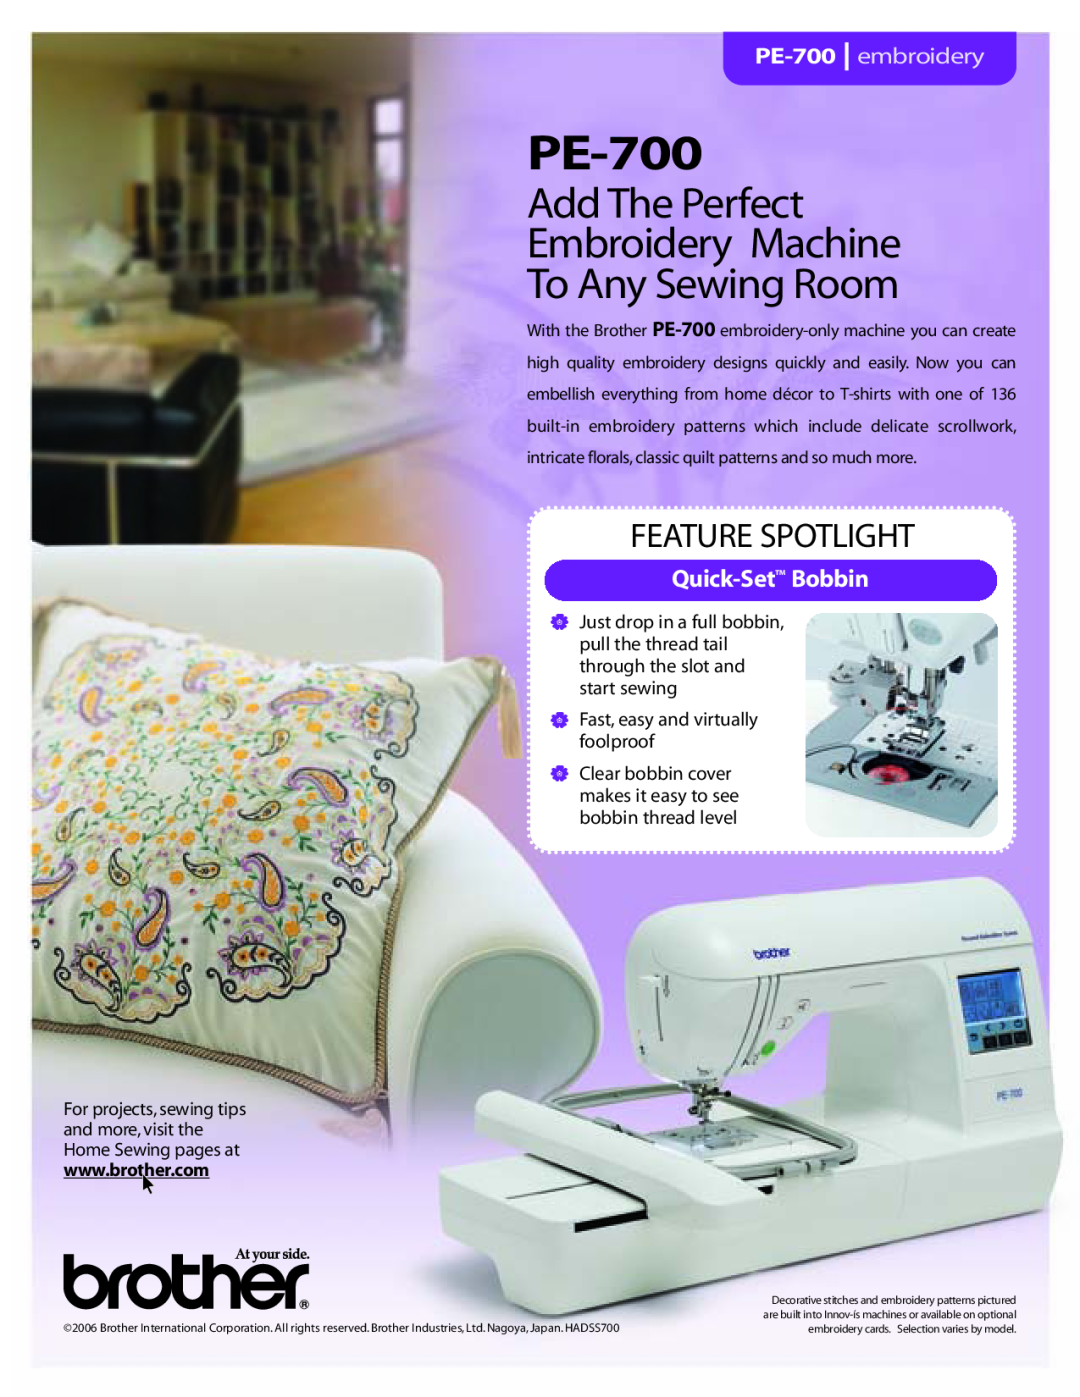 Brother manual PE-700 embroidery, V Fast, easy and virtually foolproof, Feature Spotlight, Quick-Set Bobbin 